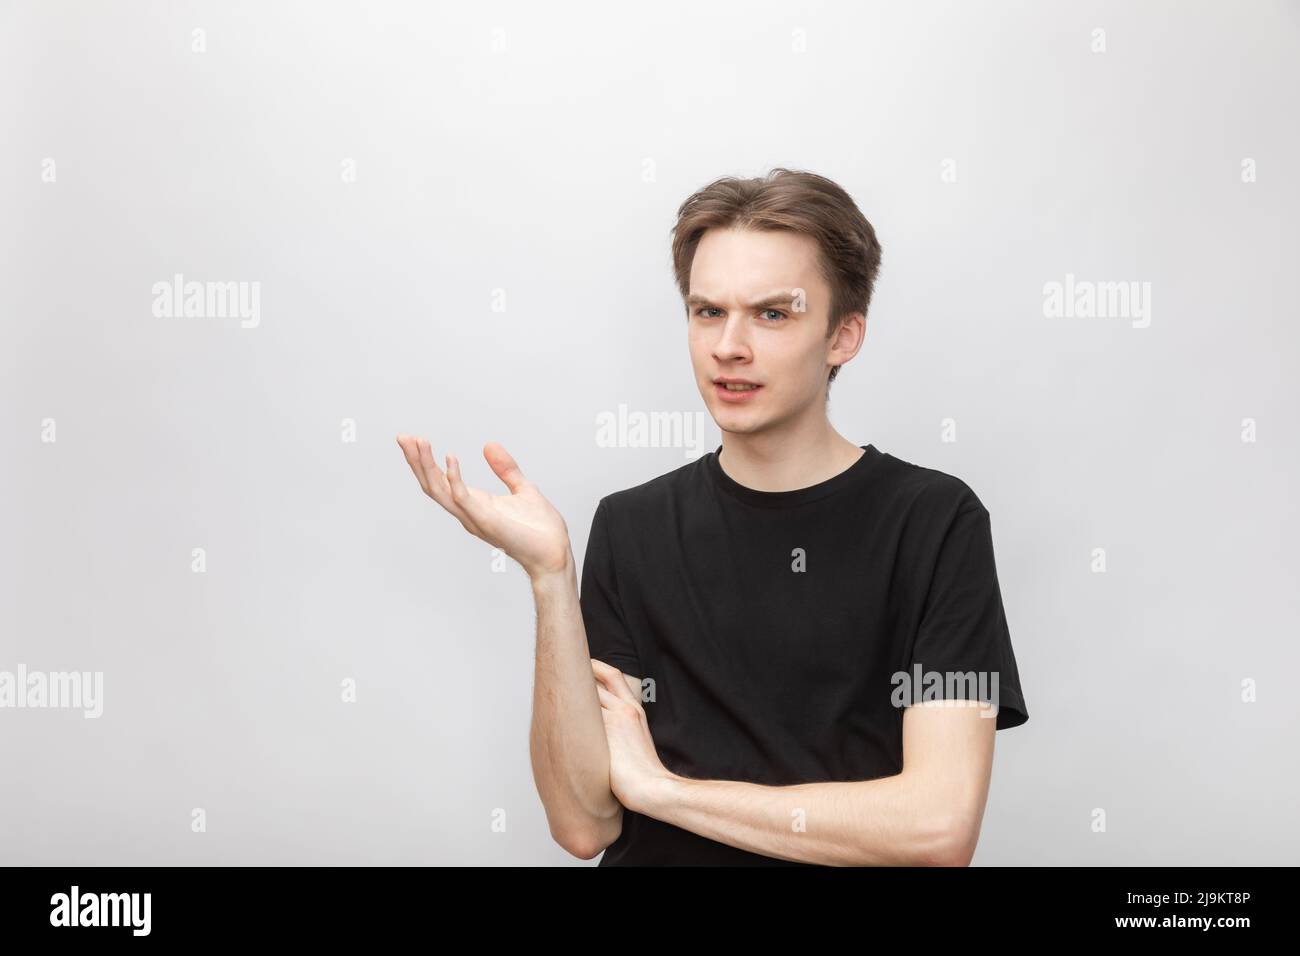 Portrait of doubtful young man wearing black tshirt holding hand in questioning gesture looking at camera suspiciously. Studio shot on gray background Stock Photo